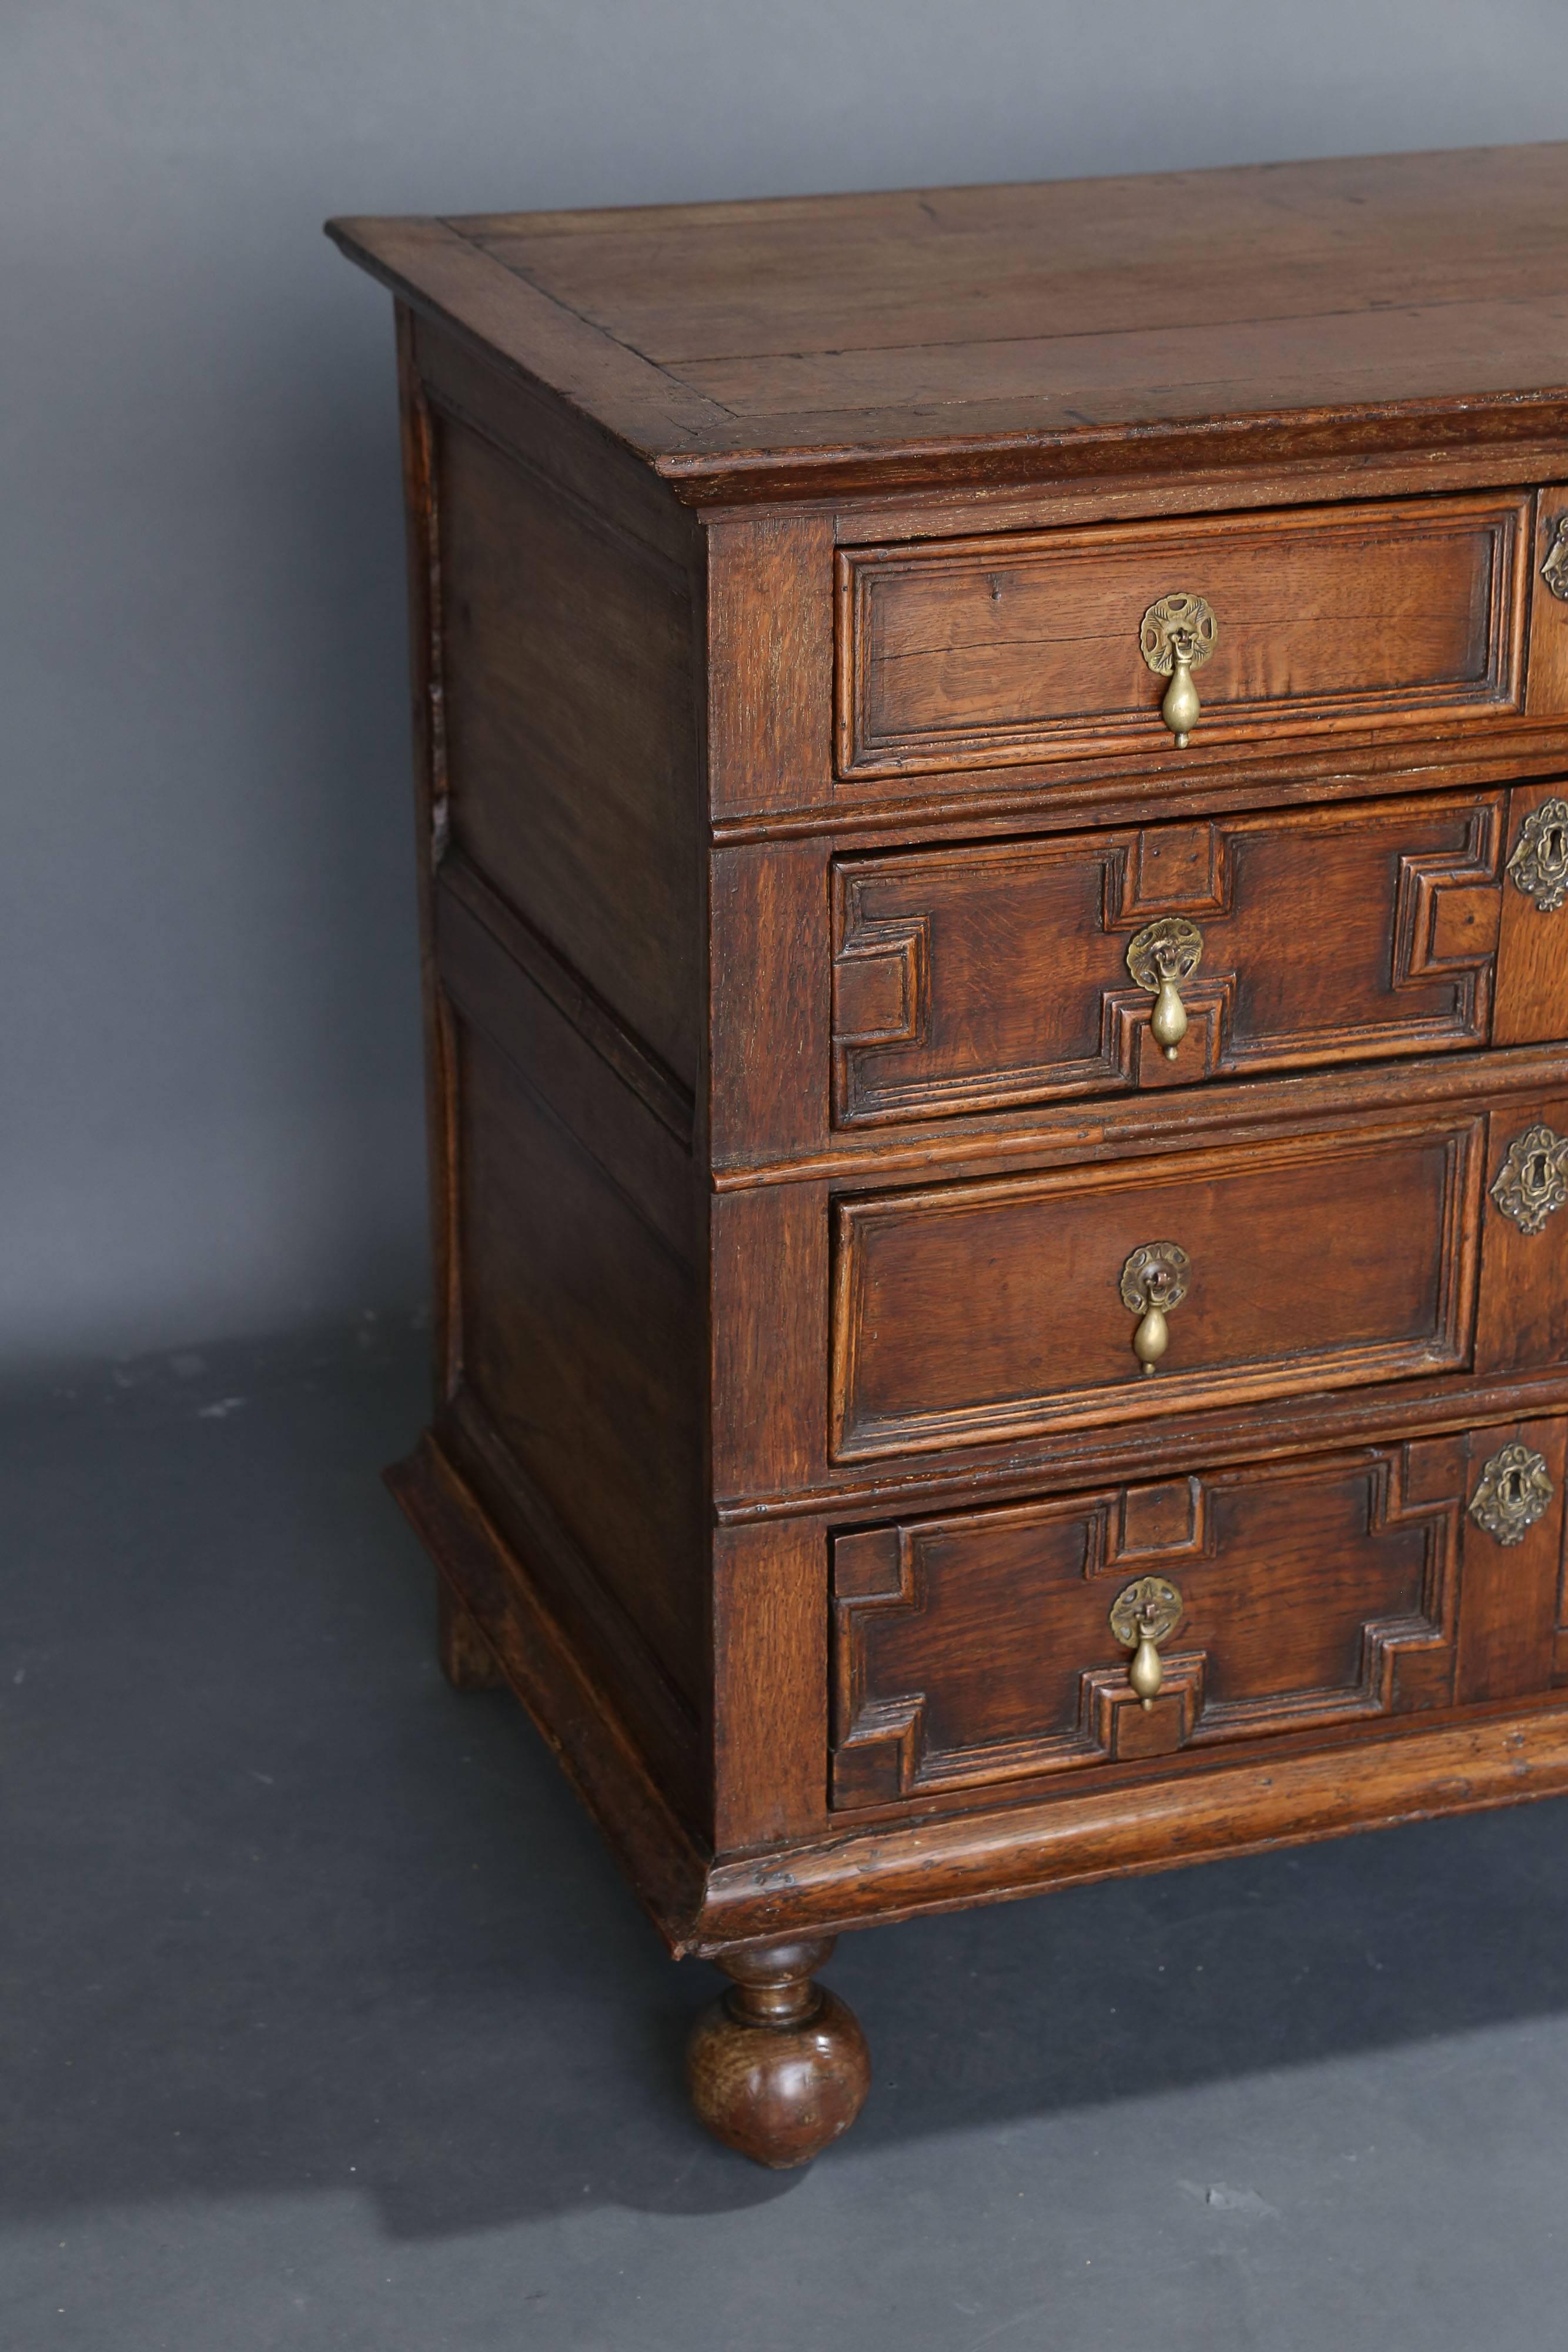 17th century Jacobean chest with four drawers. Period hardware and beautiful patina. Formerly in a dealer's home. Walnut details and oak throughout drawers.